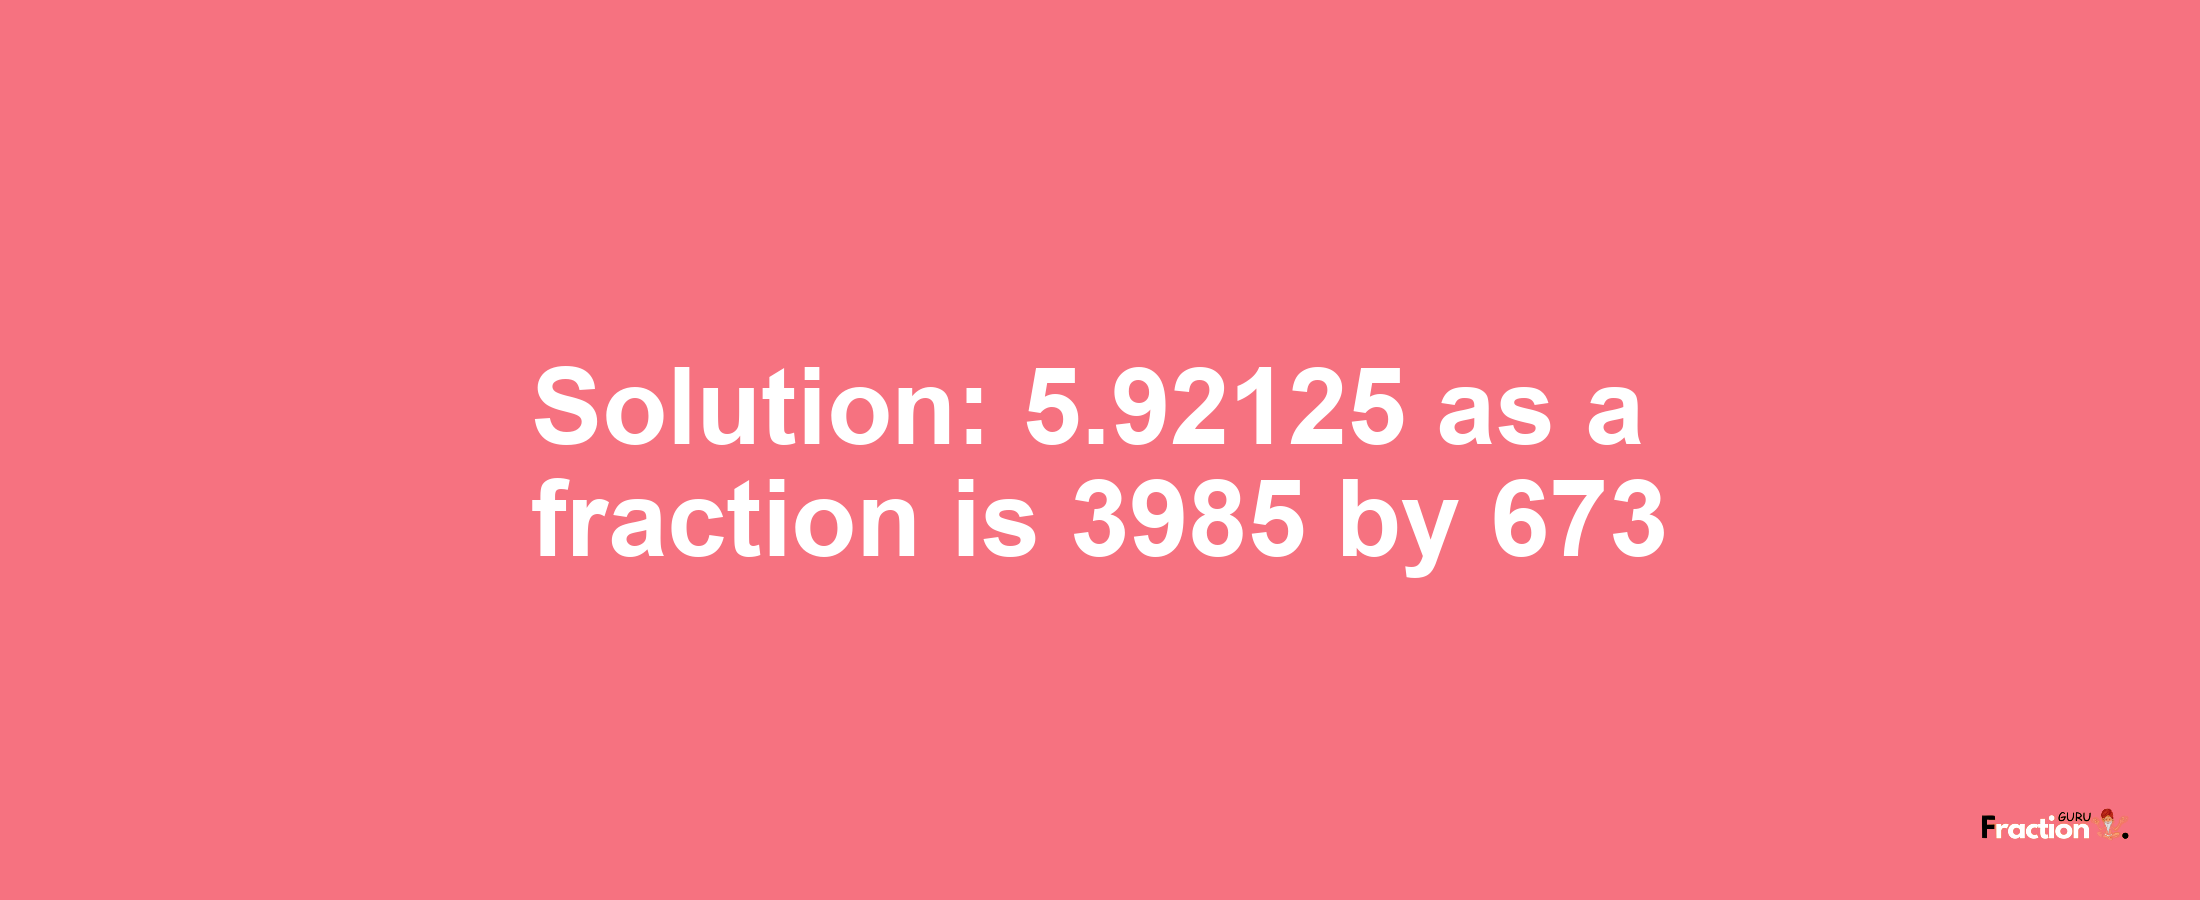 Solution:5.92125 as a fraction is 3985/673